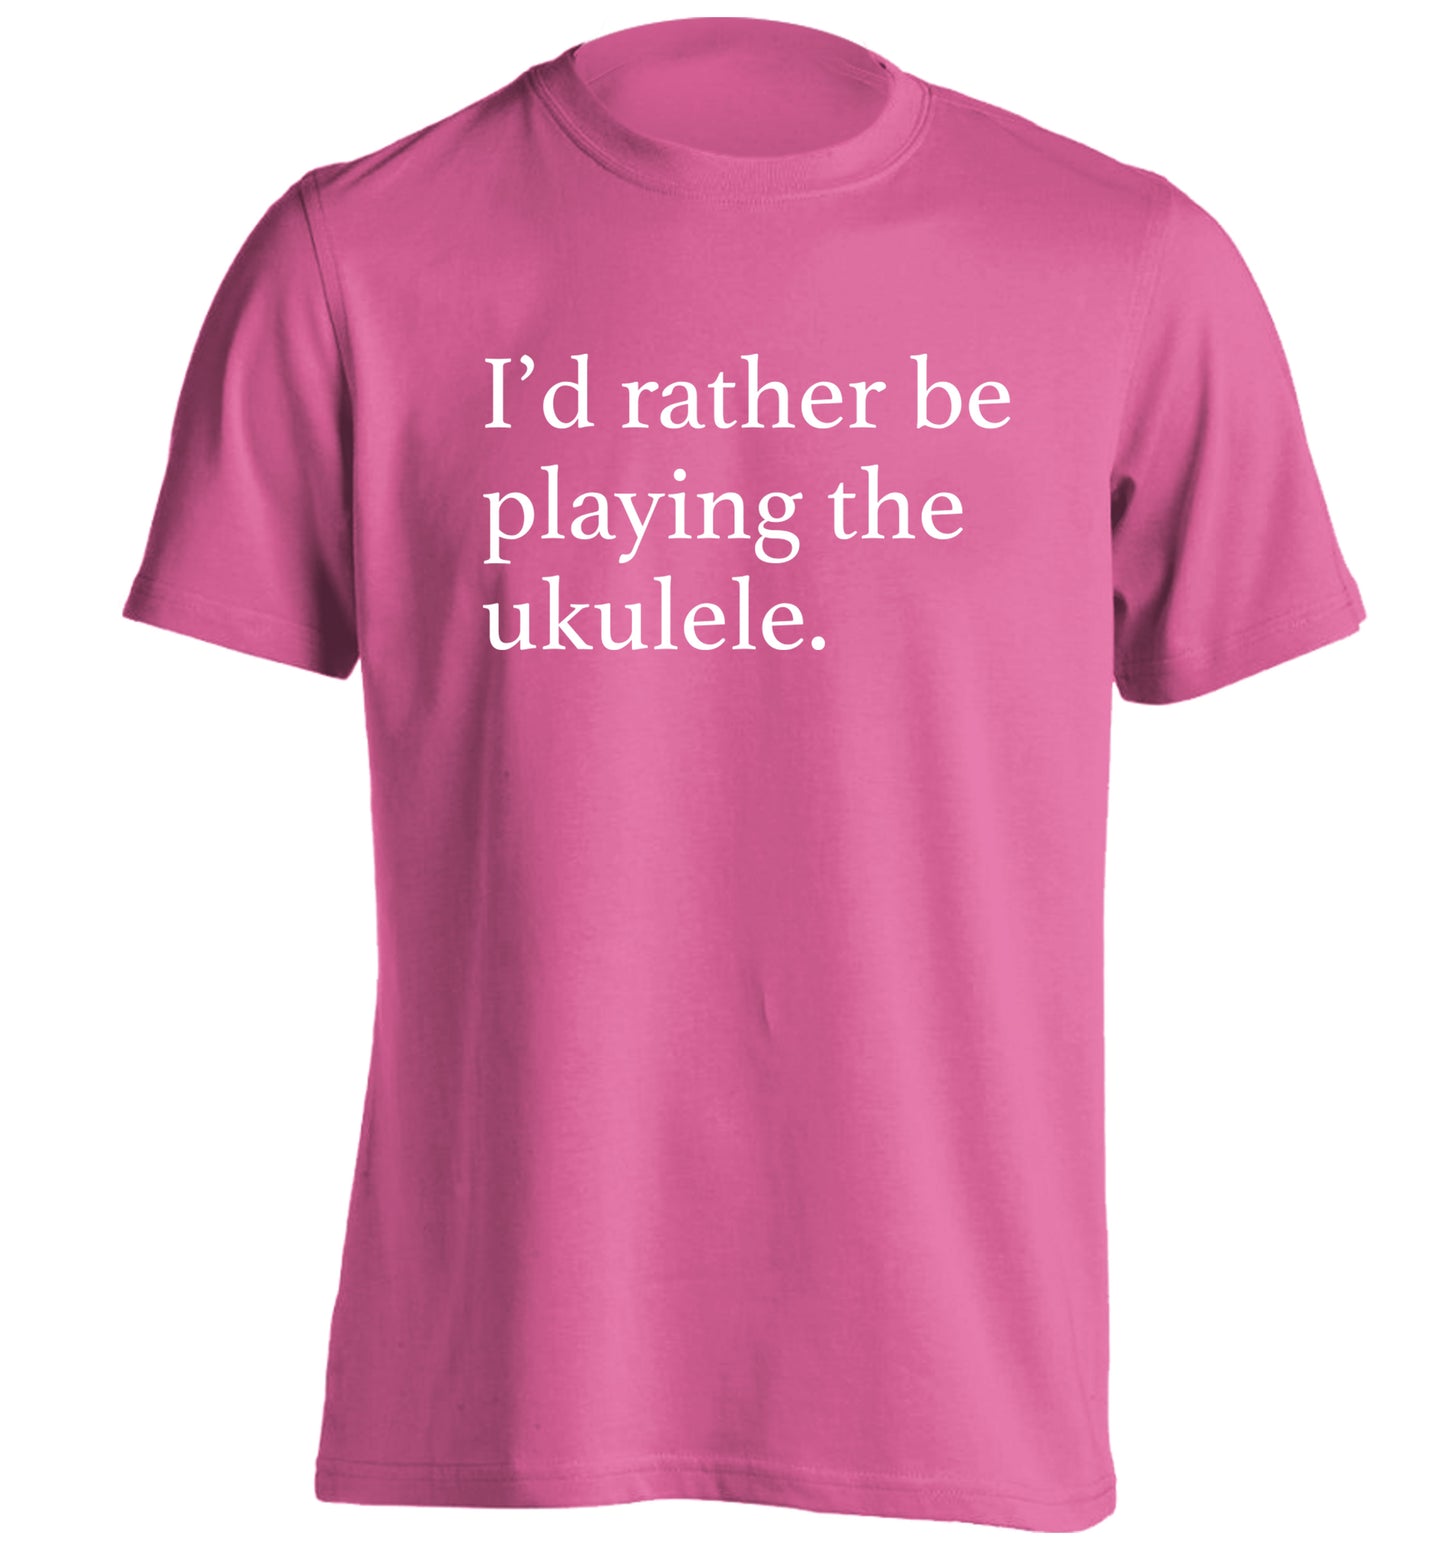 I'd rather by playing the ukulele adults unisex pink Tshirt 2XL